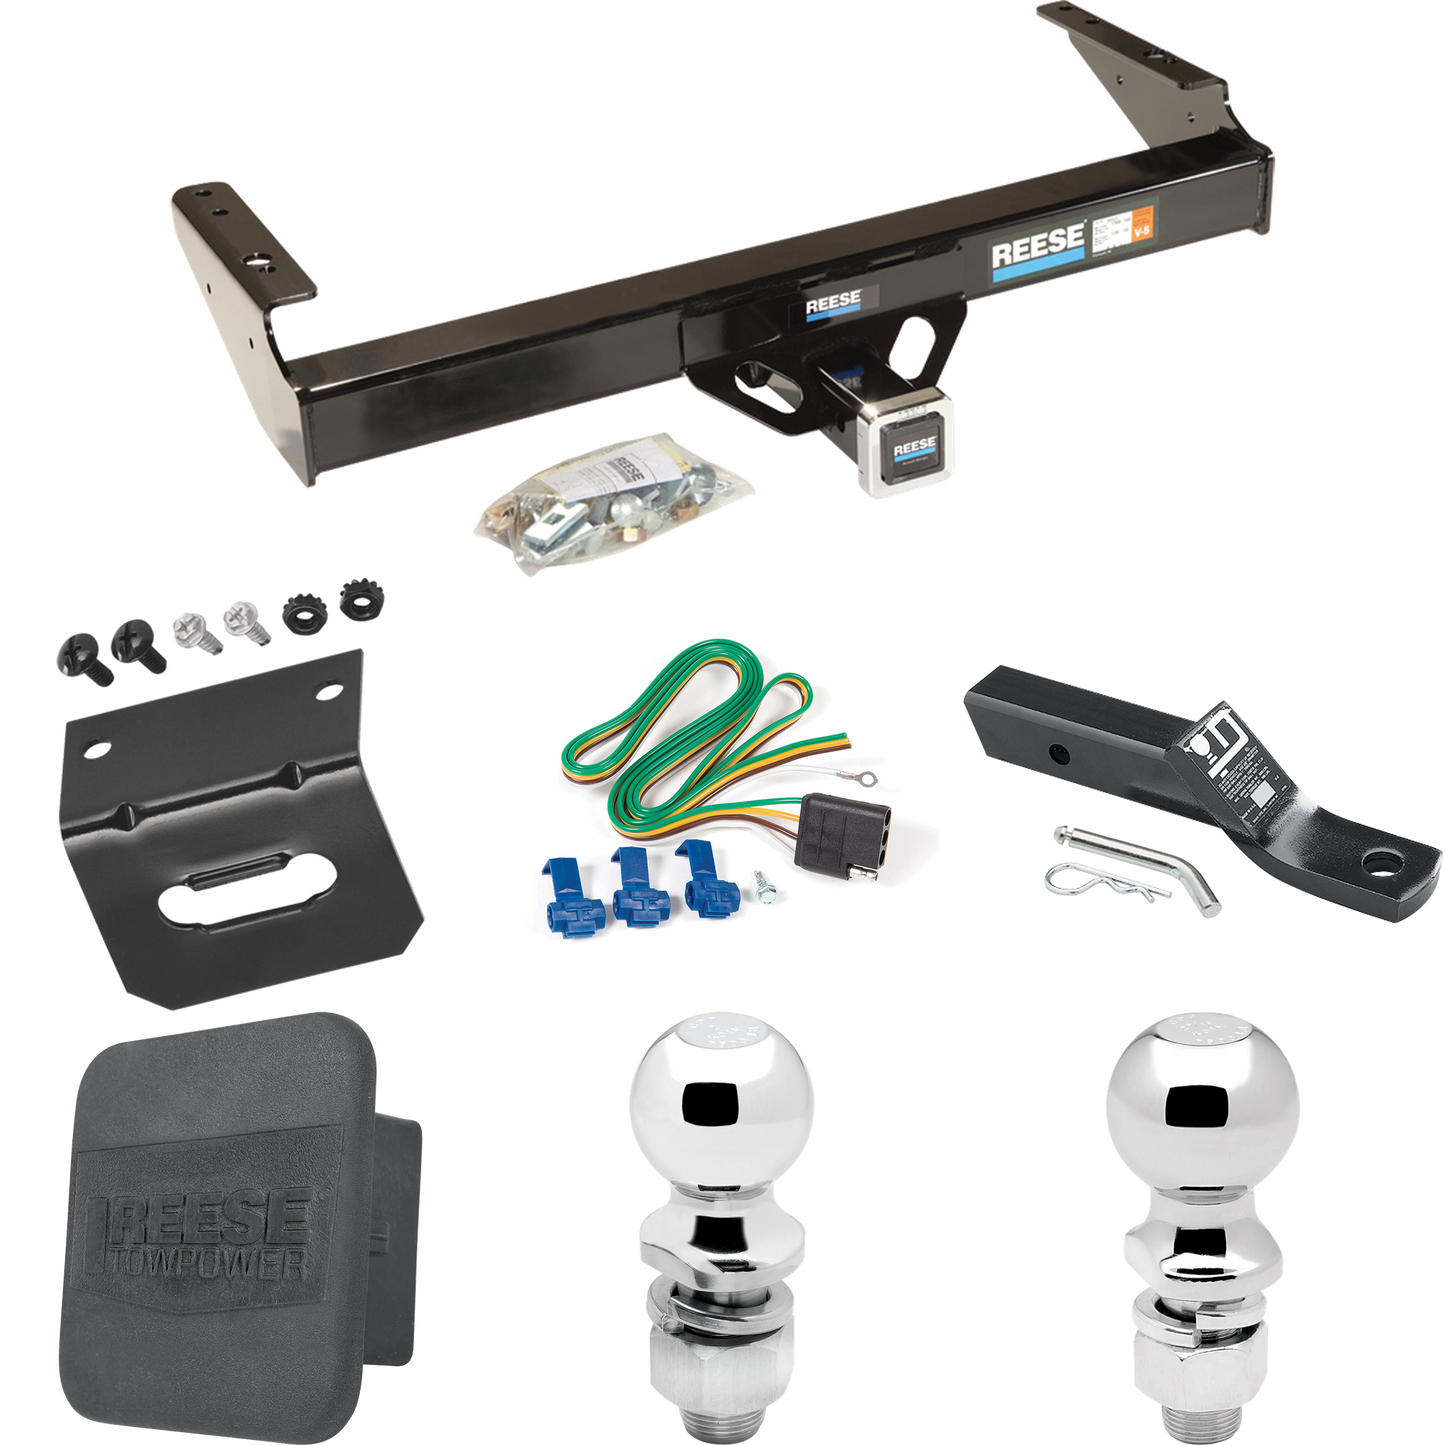 Fits 1971-1972 Dodge W300 Trailer Hitch Tow PKG w/ 4-Flat Wiring + Ball Mount w/ 2" Drop + 2" Ball + 2-5/16" Ball + Wiring Bracket + Hitch Cover By Reese Towpower